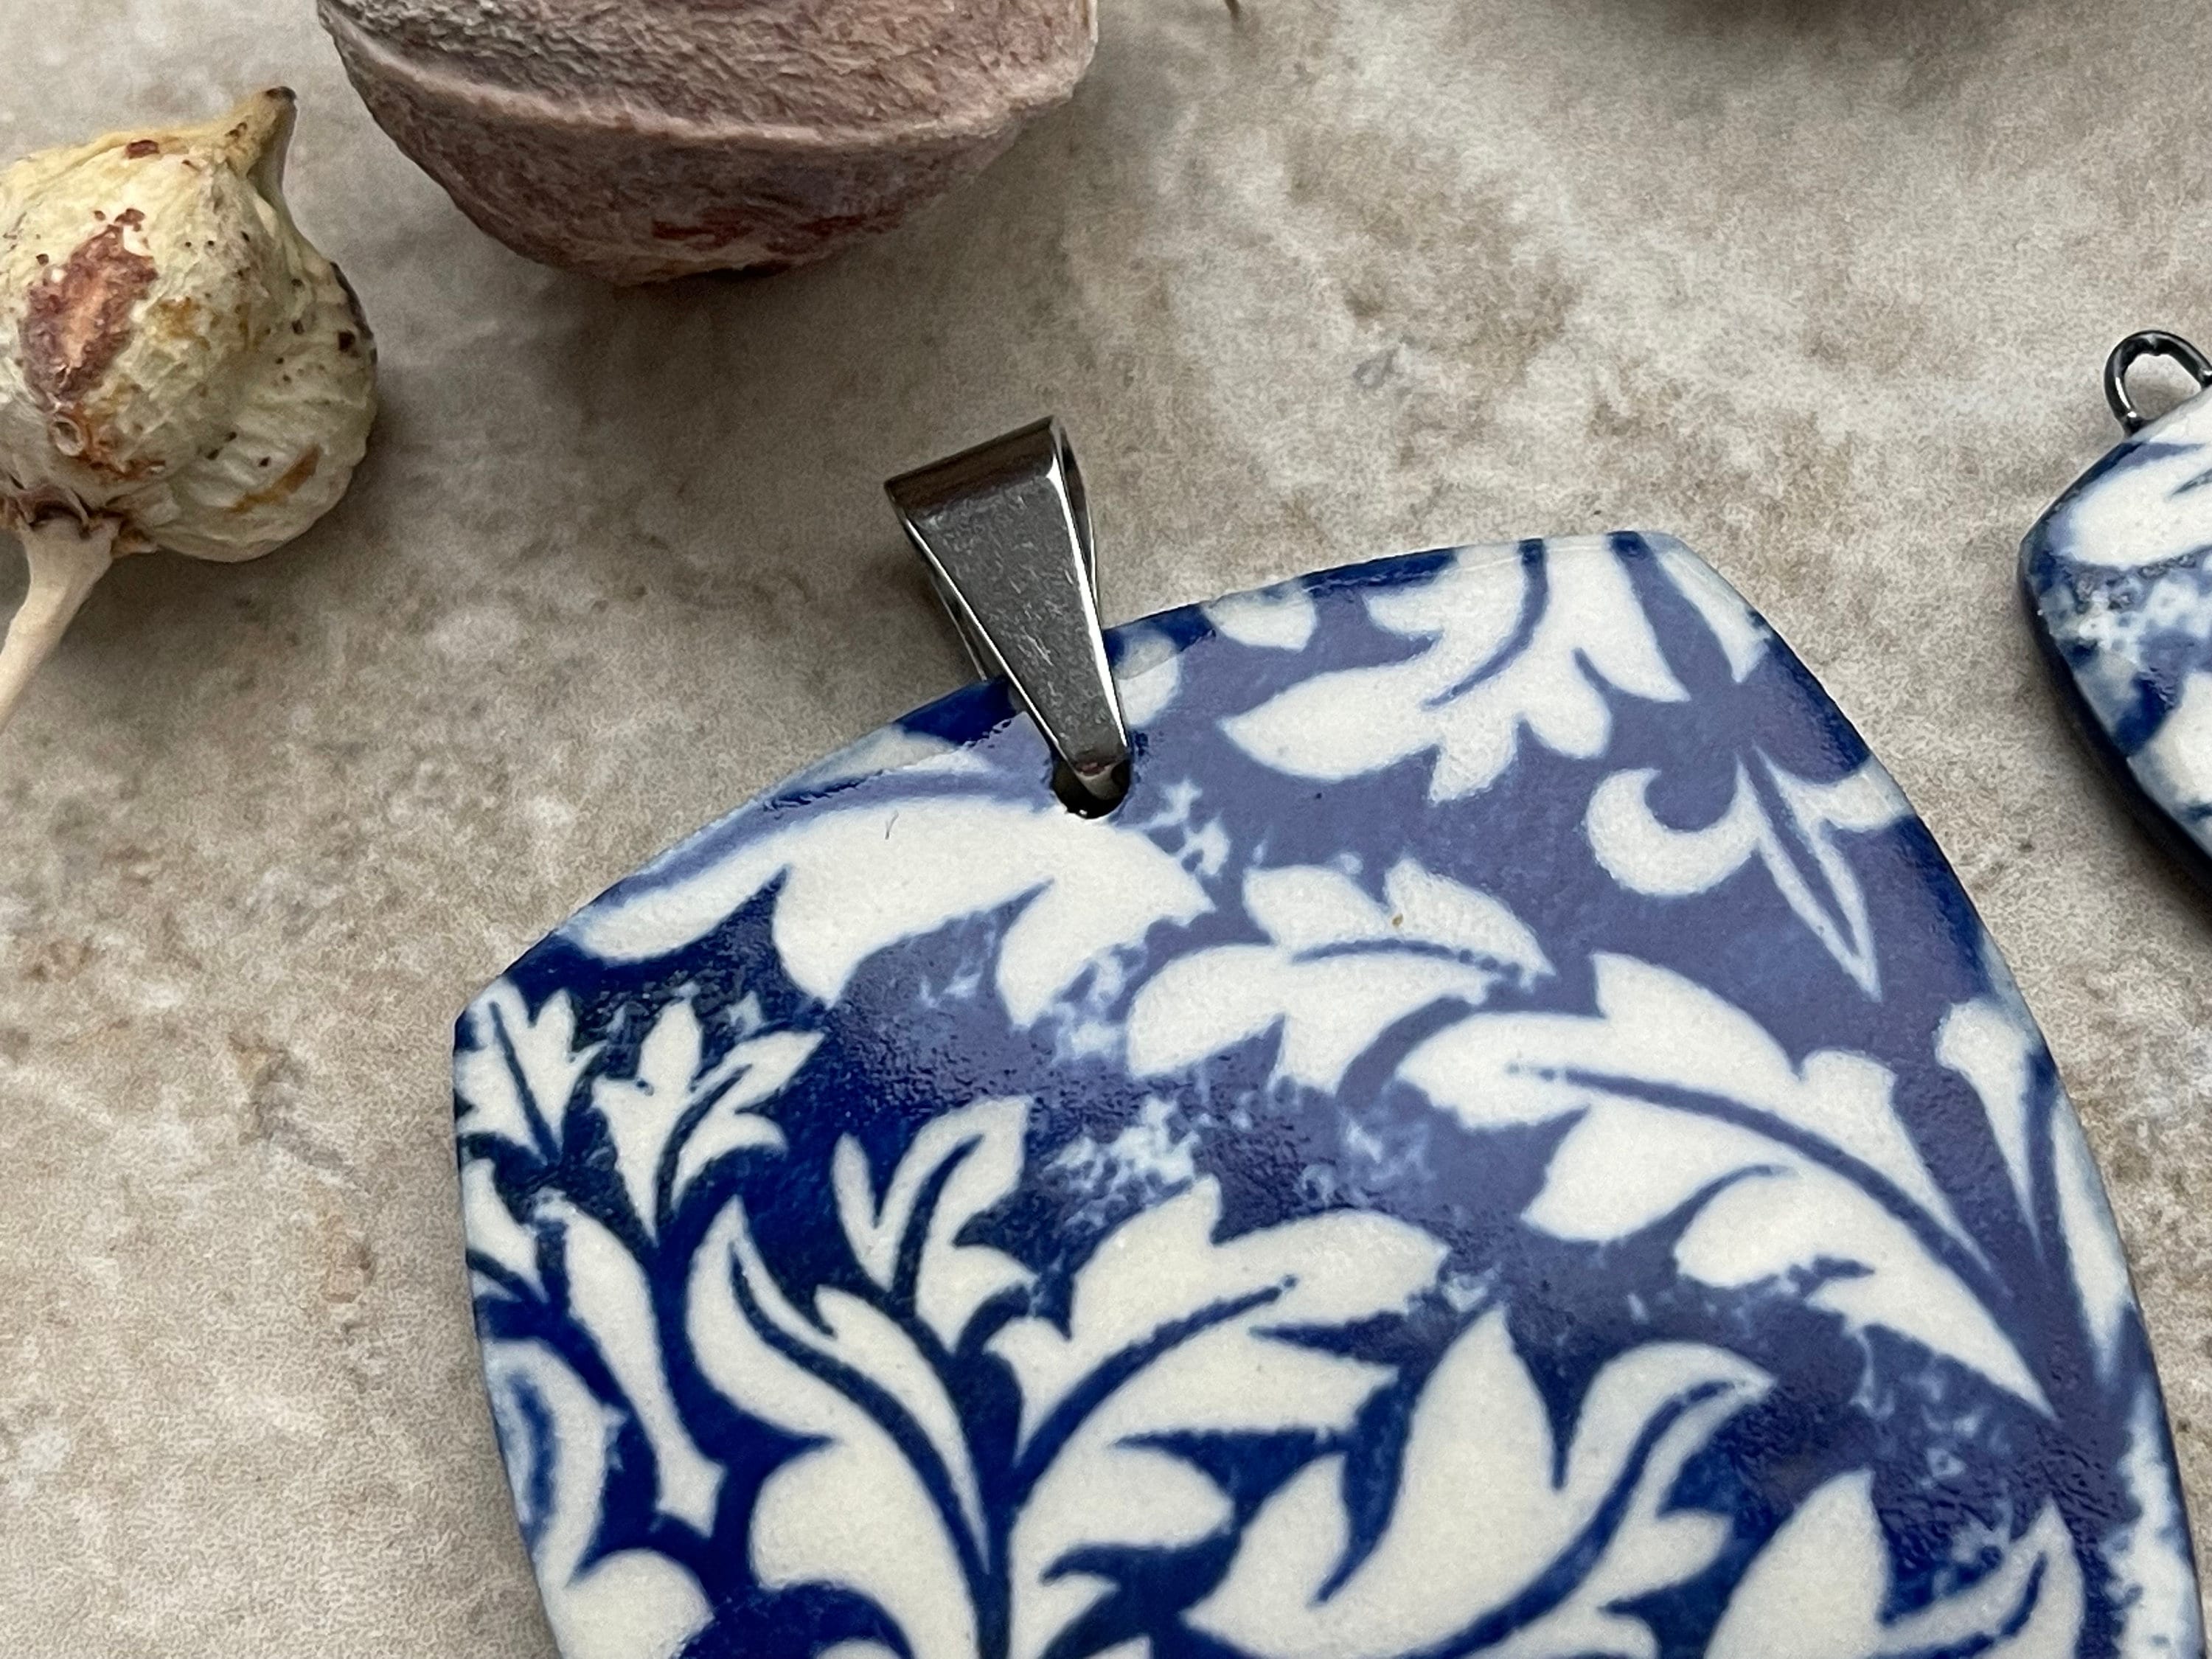 Cobalt Damask Pendant and Charms, Blue and White Square Pendant, Porcelain Ceramic Pendant, Artisan Pendant, Jewelry Making Components